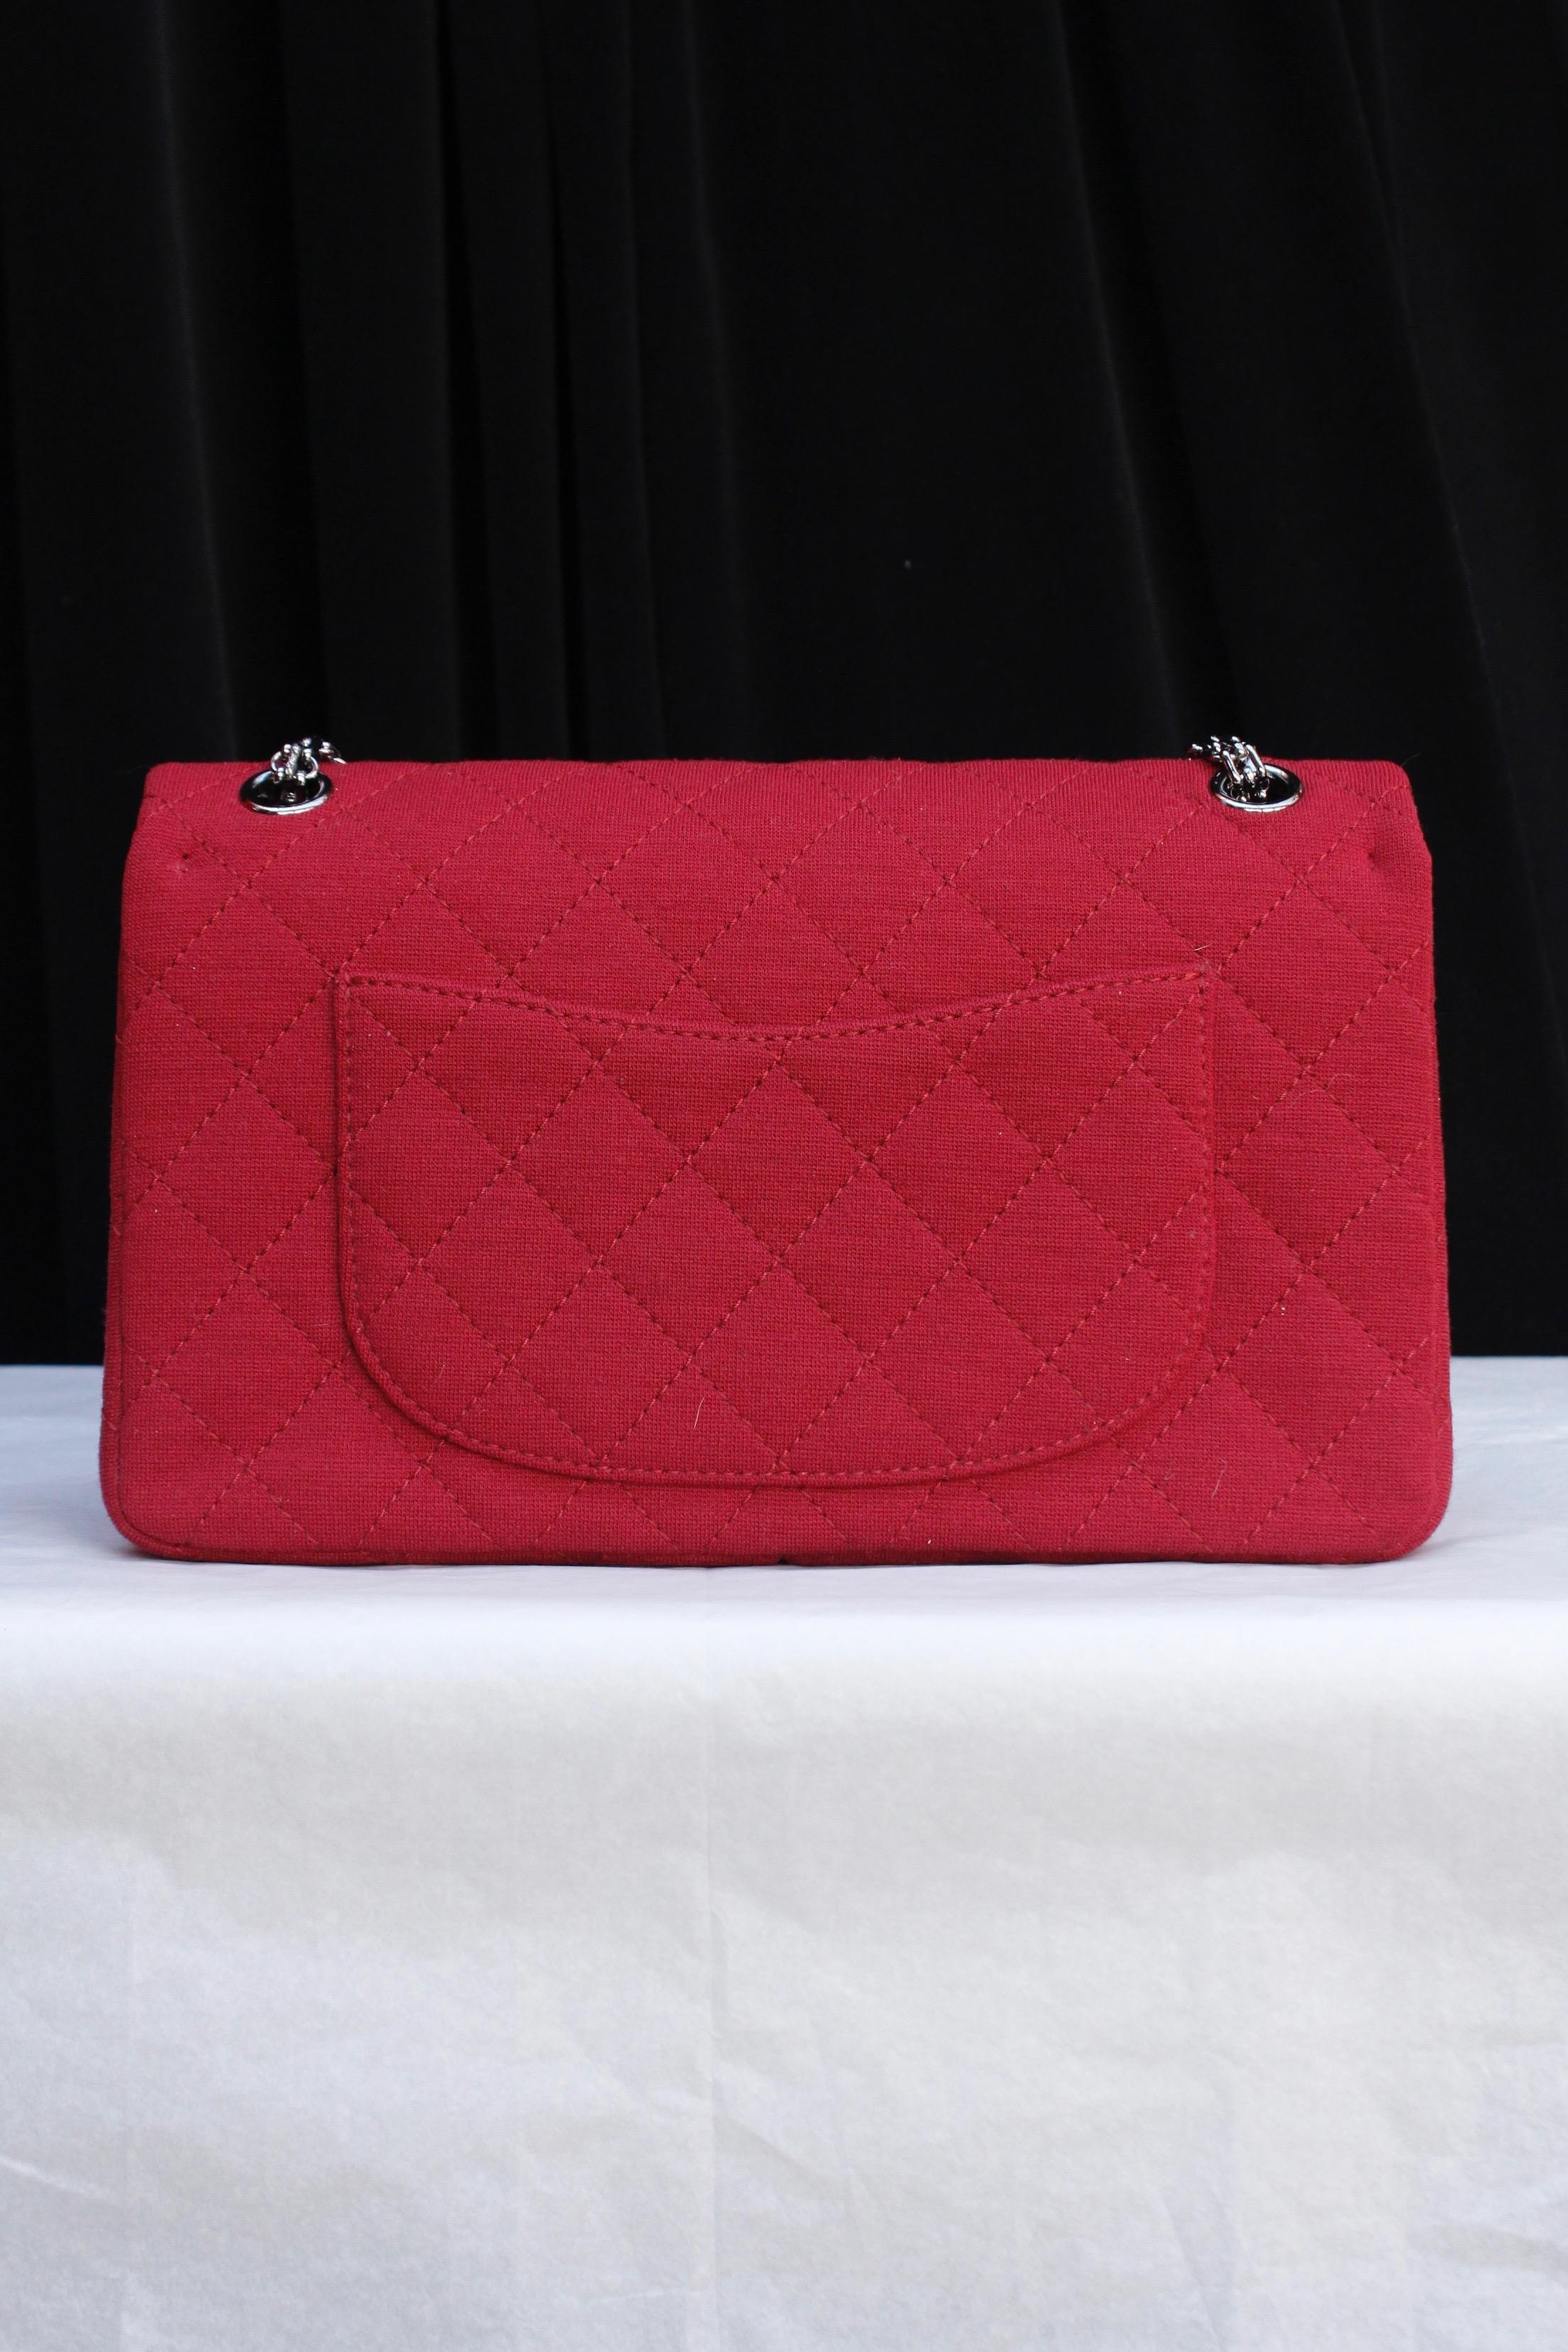 Women's Chanel quilted red jersey 2.55 bag with silver plated chain handle For Sale